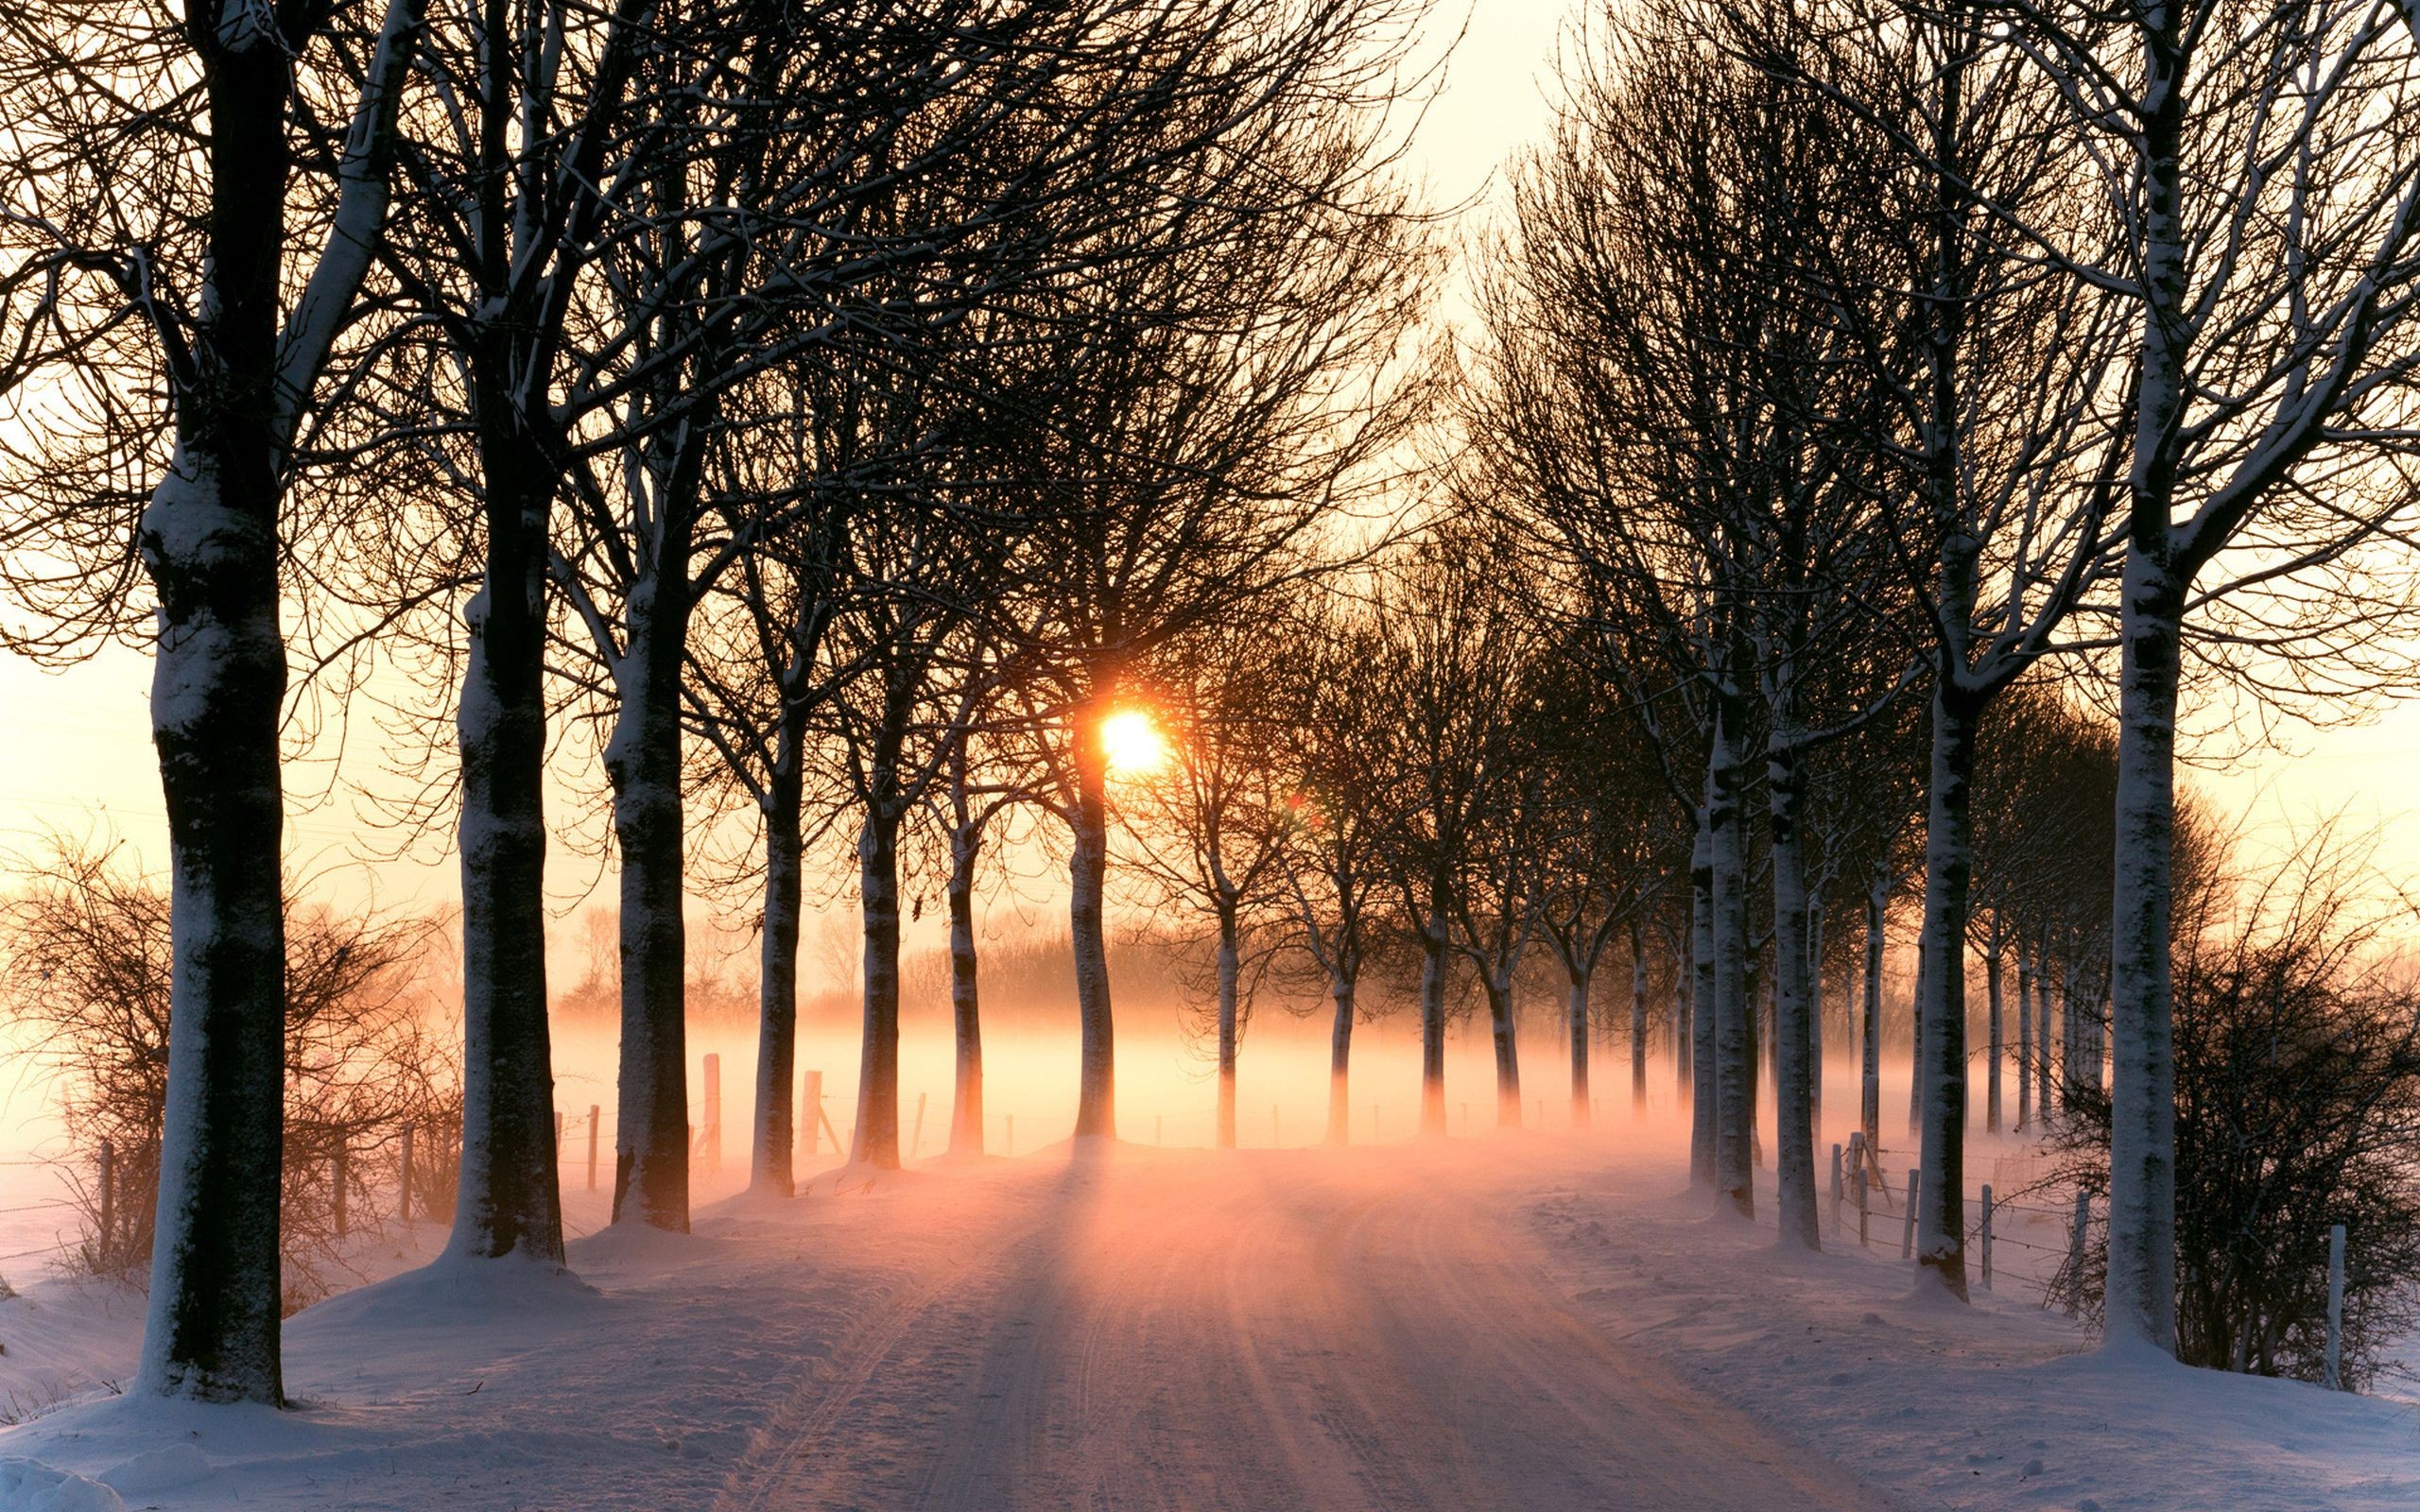 General 2560x1600 photography nature plants landscape road snow winter trees mist cold outdoors sunlight